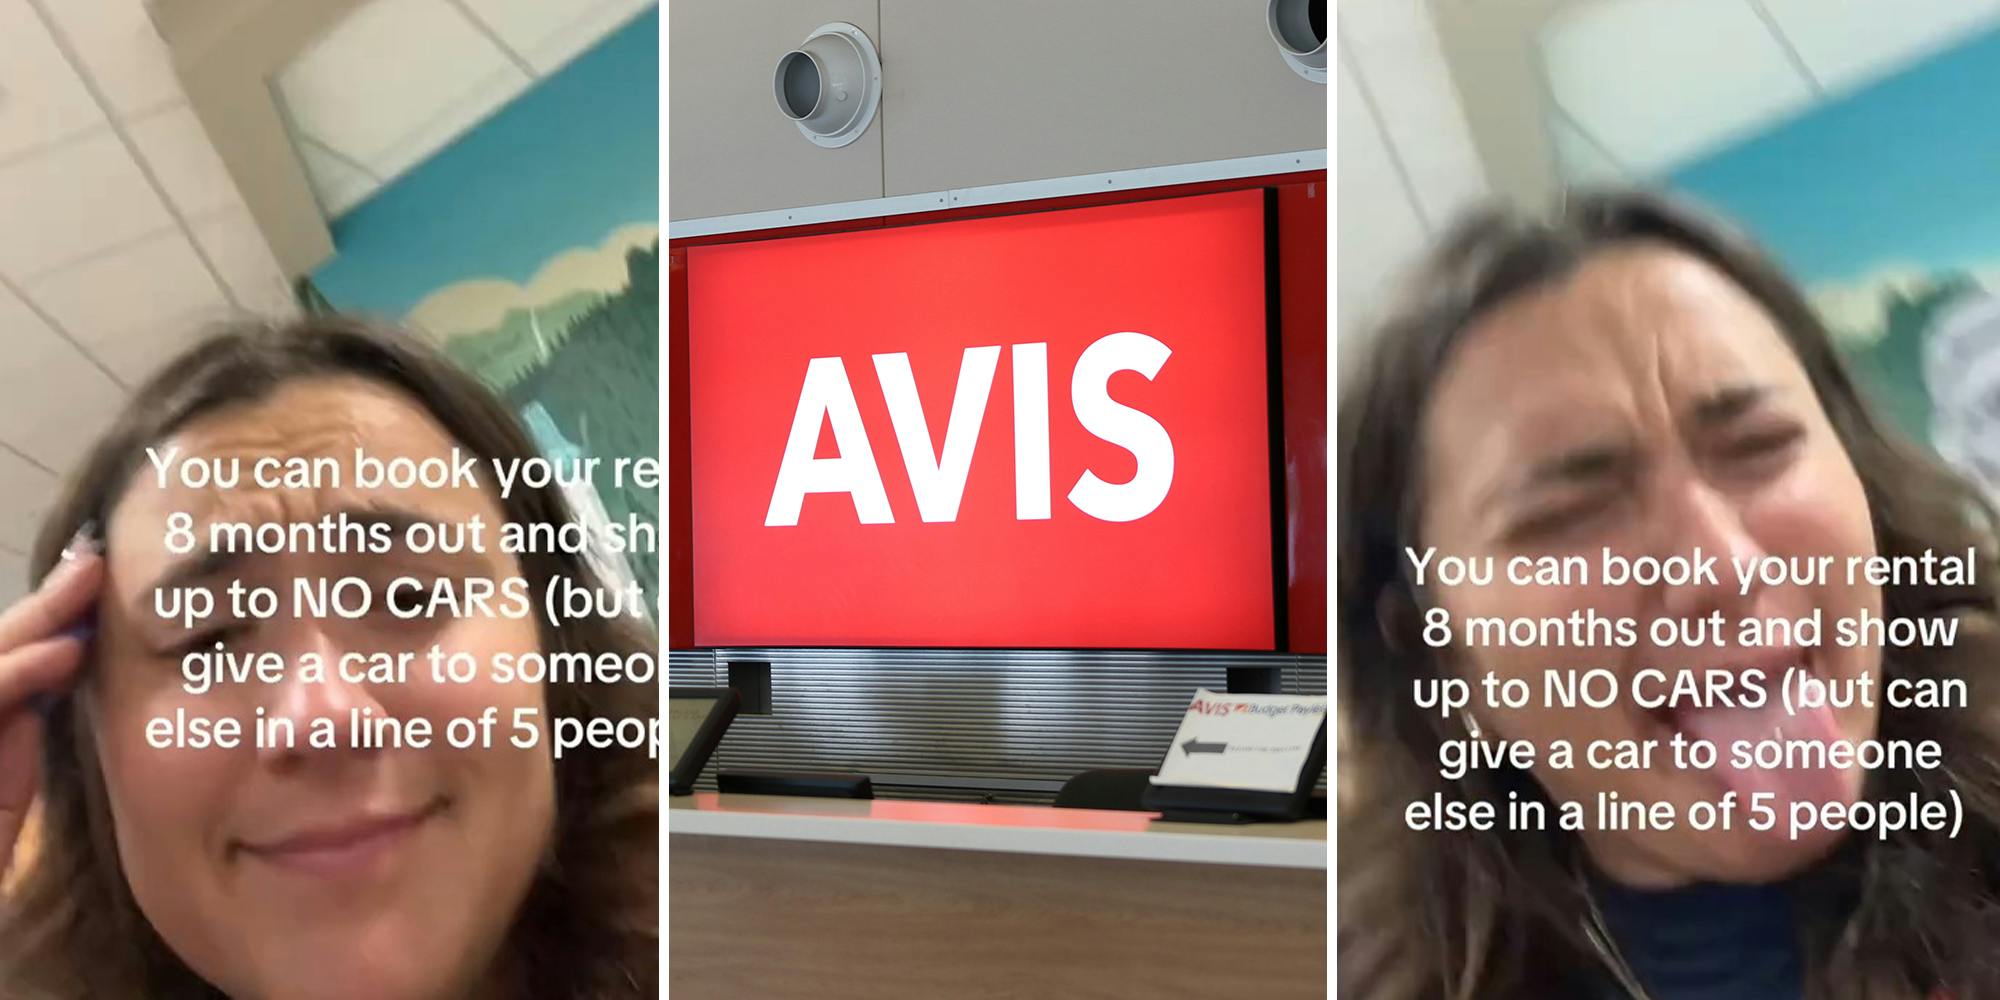 Woman warns using Avis or Budget rental cars when she books 8 months in advance of her trip